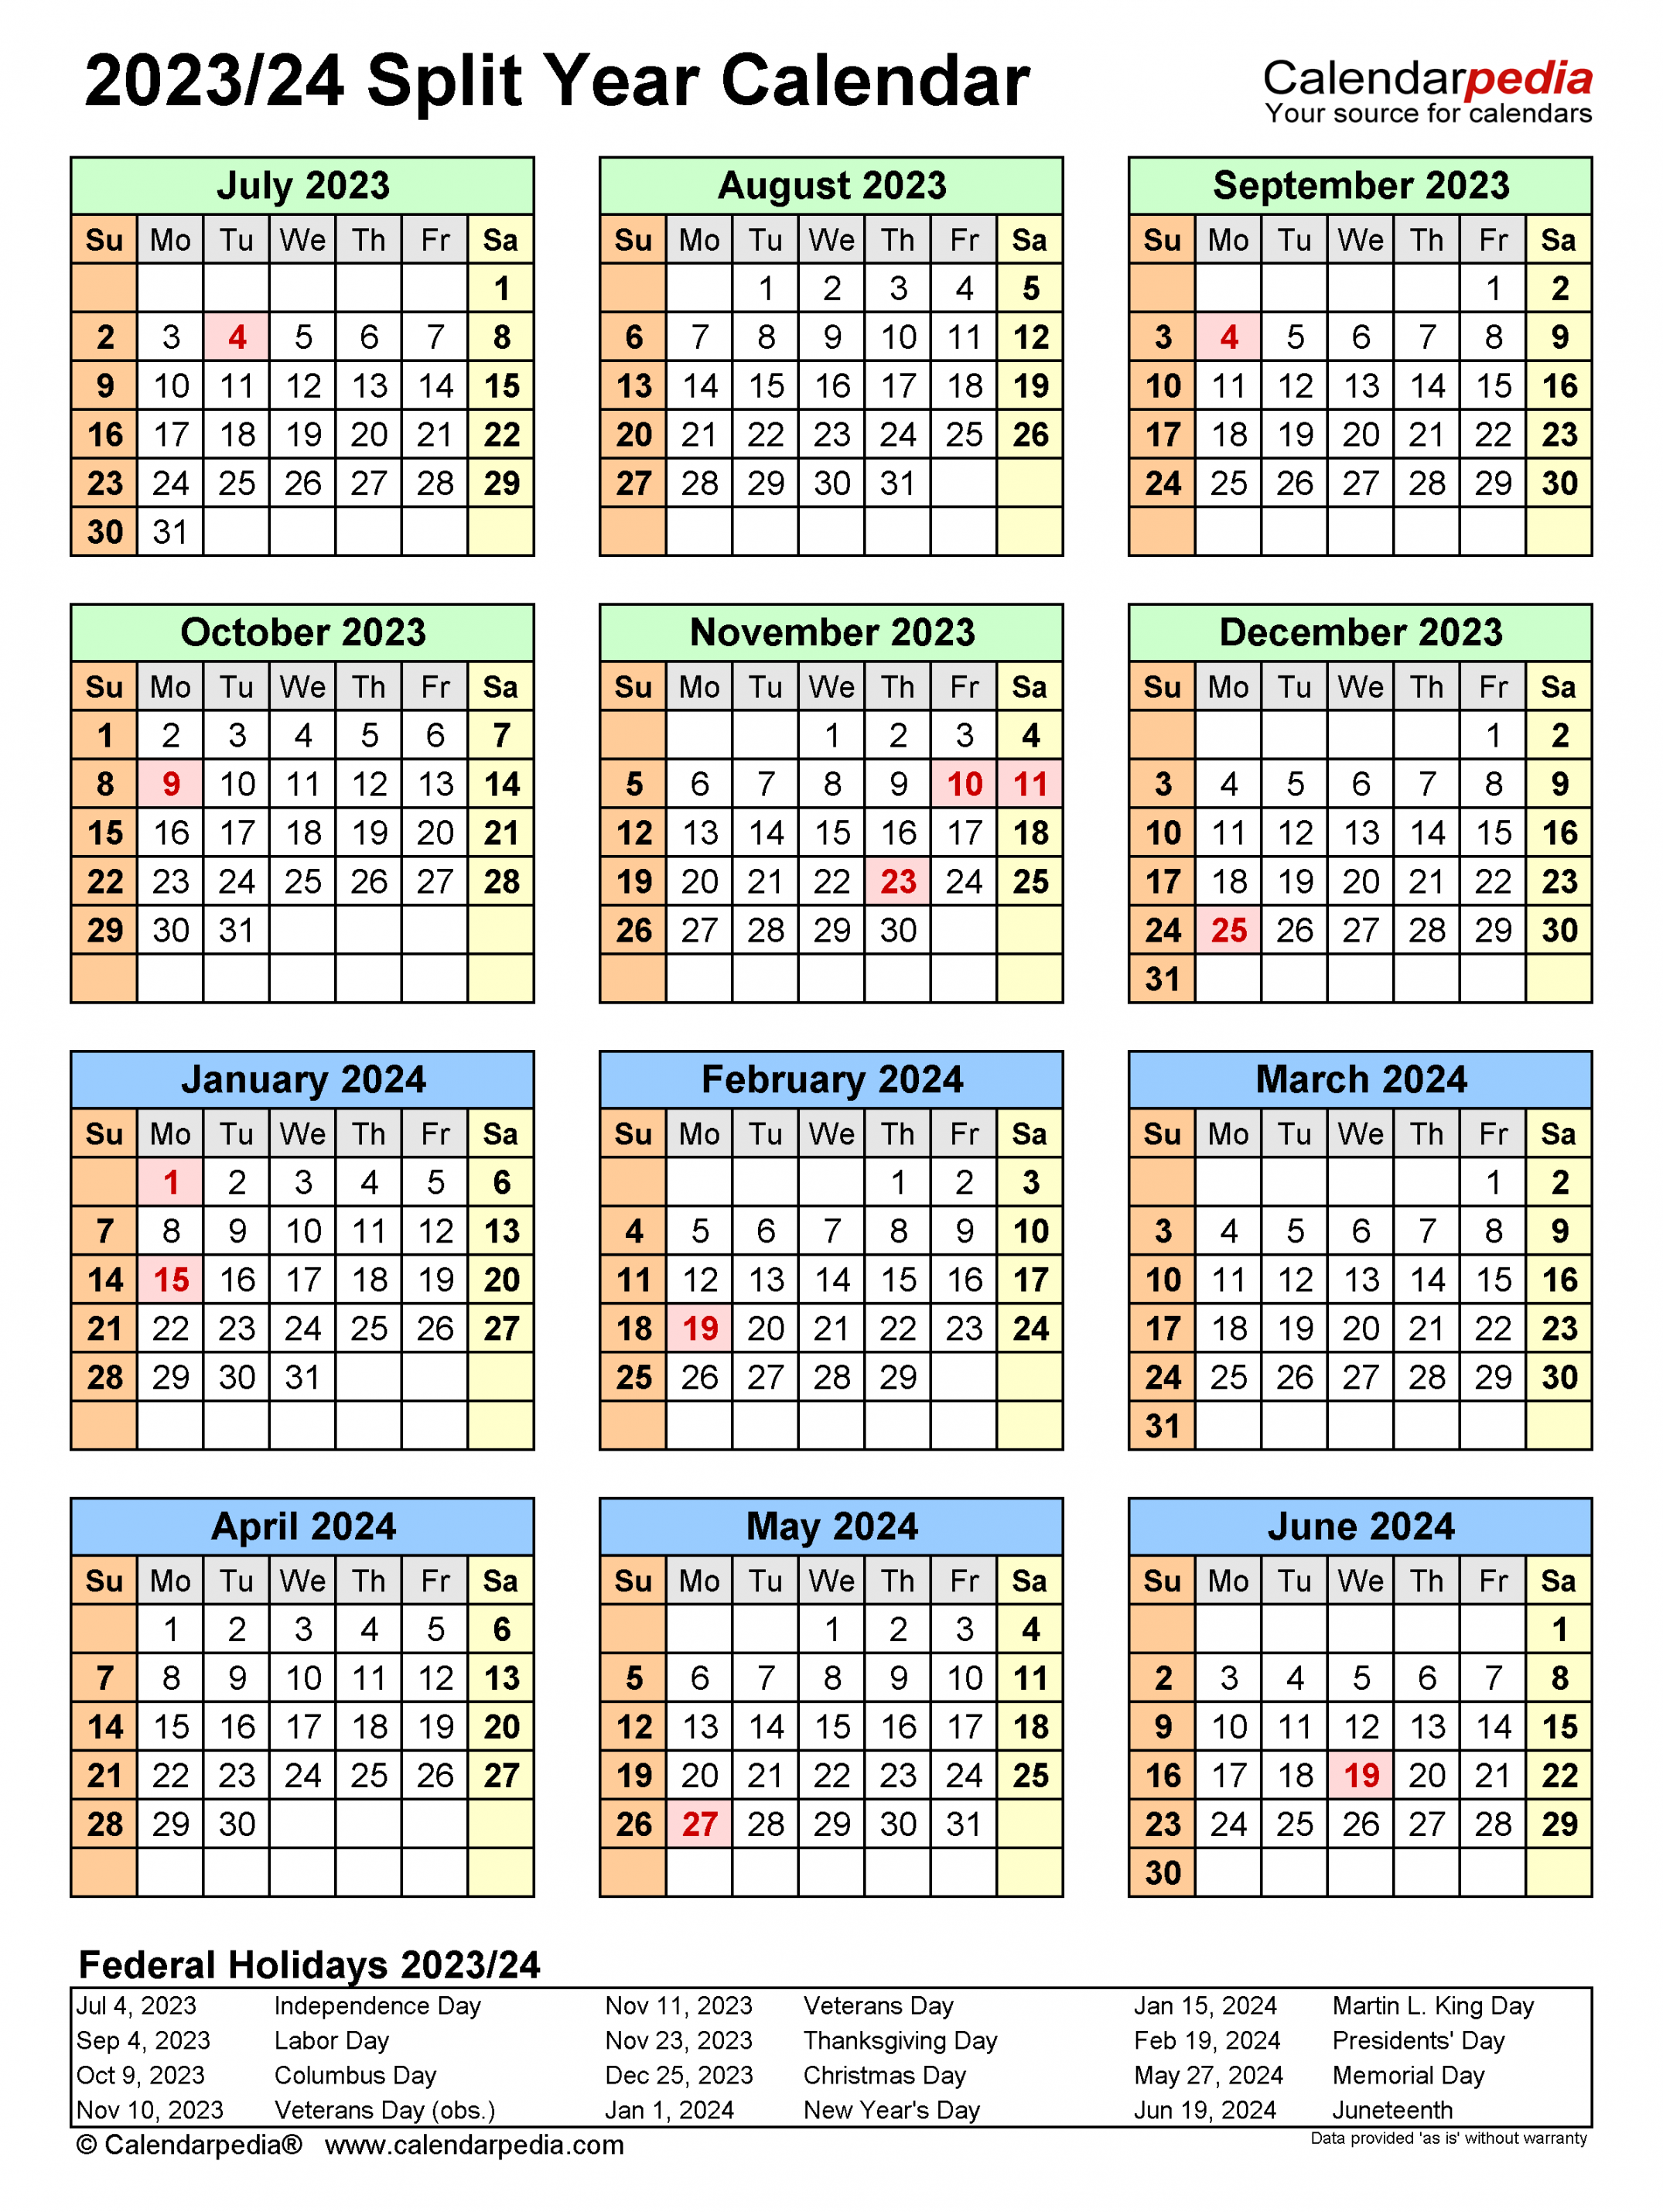 Split Year Calendars / (July to June) - Word templates